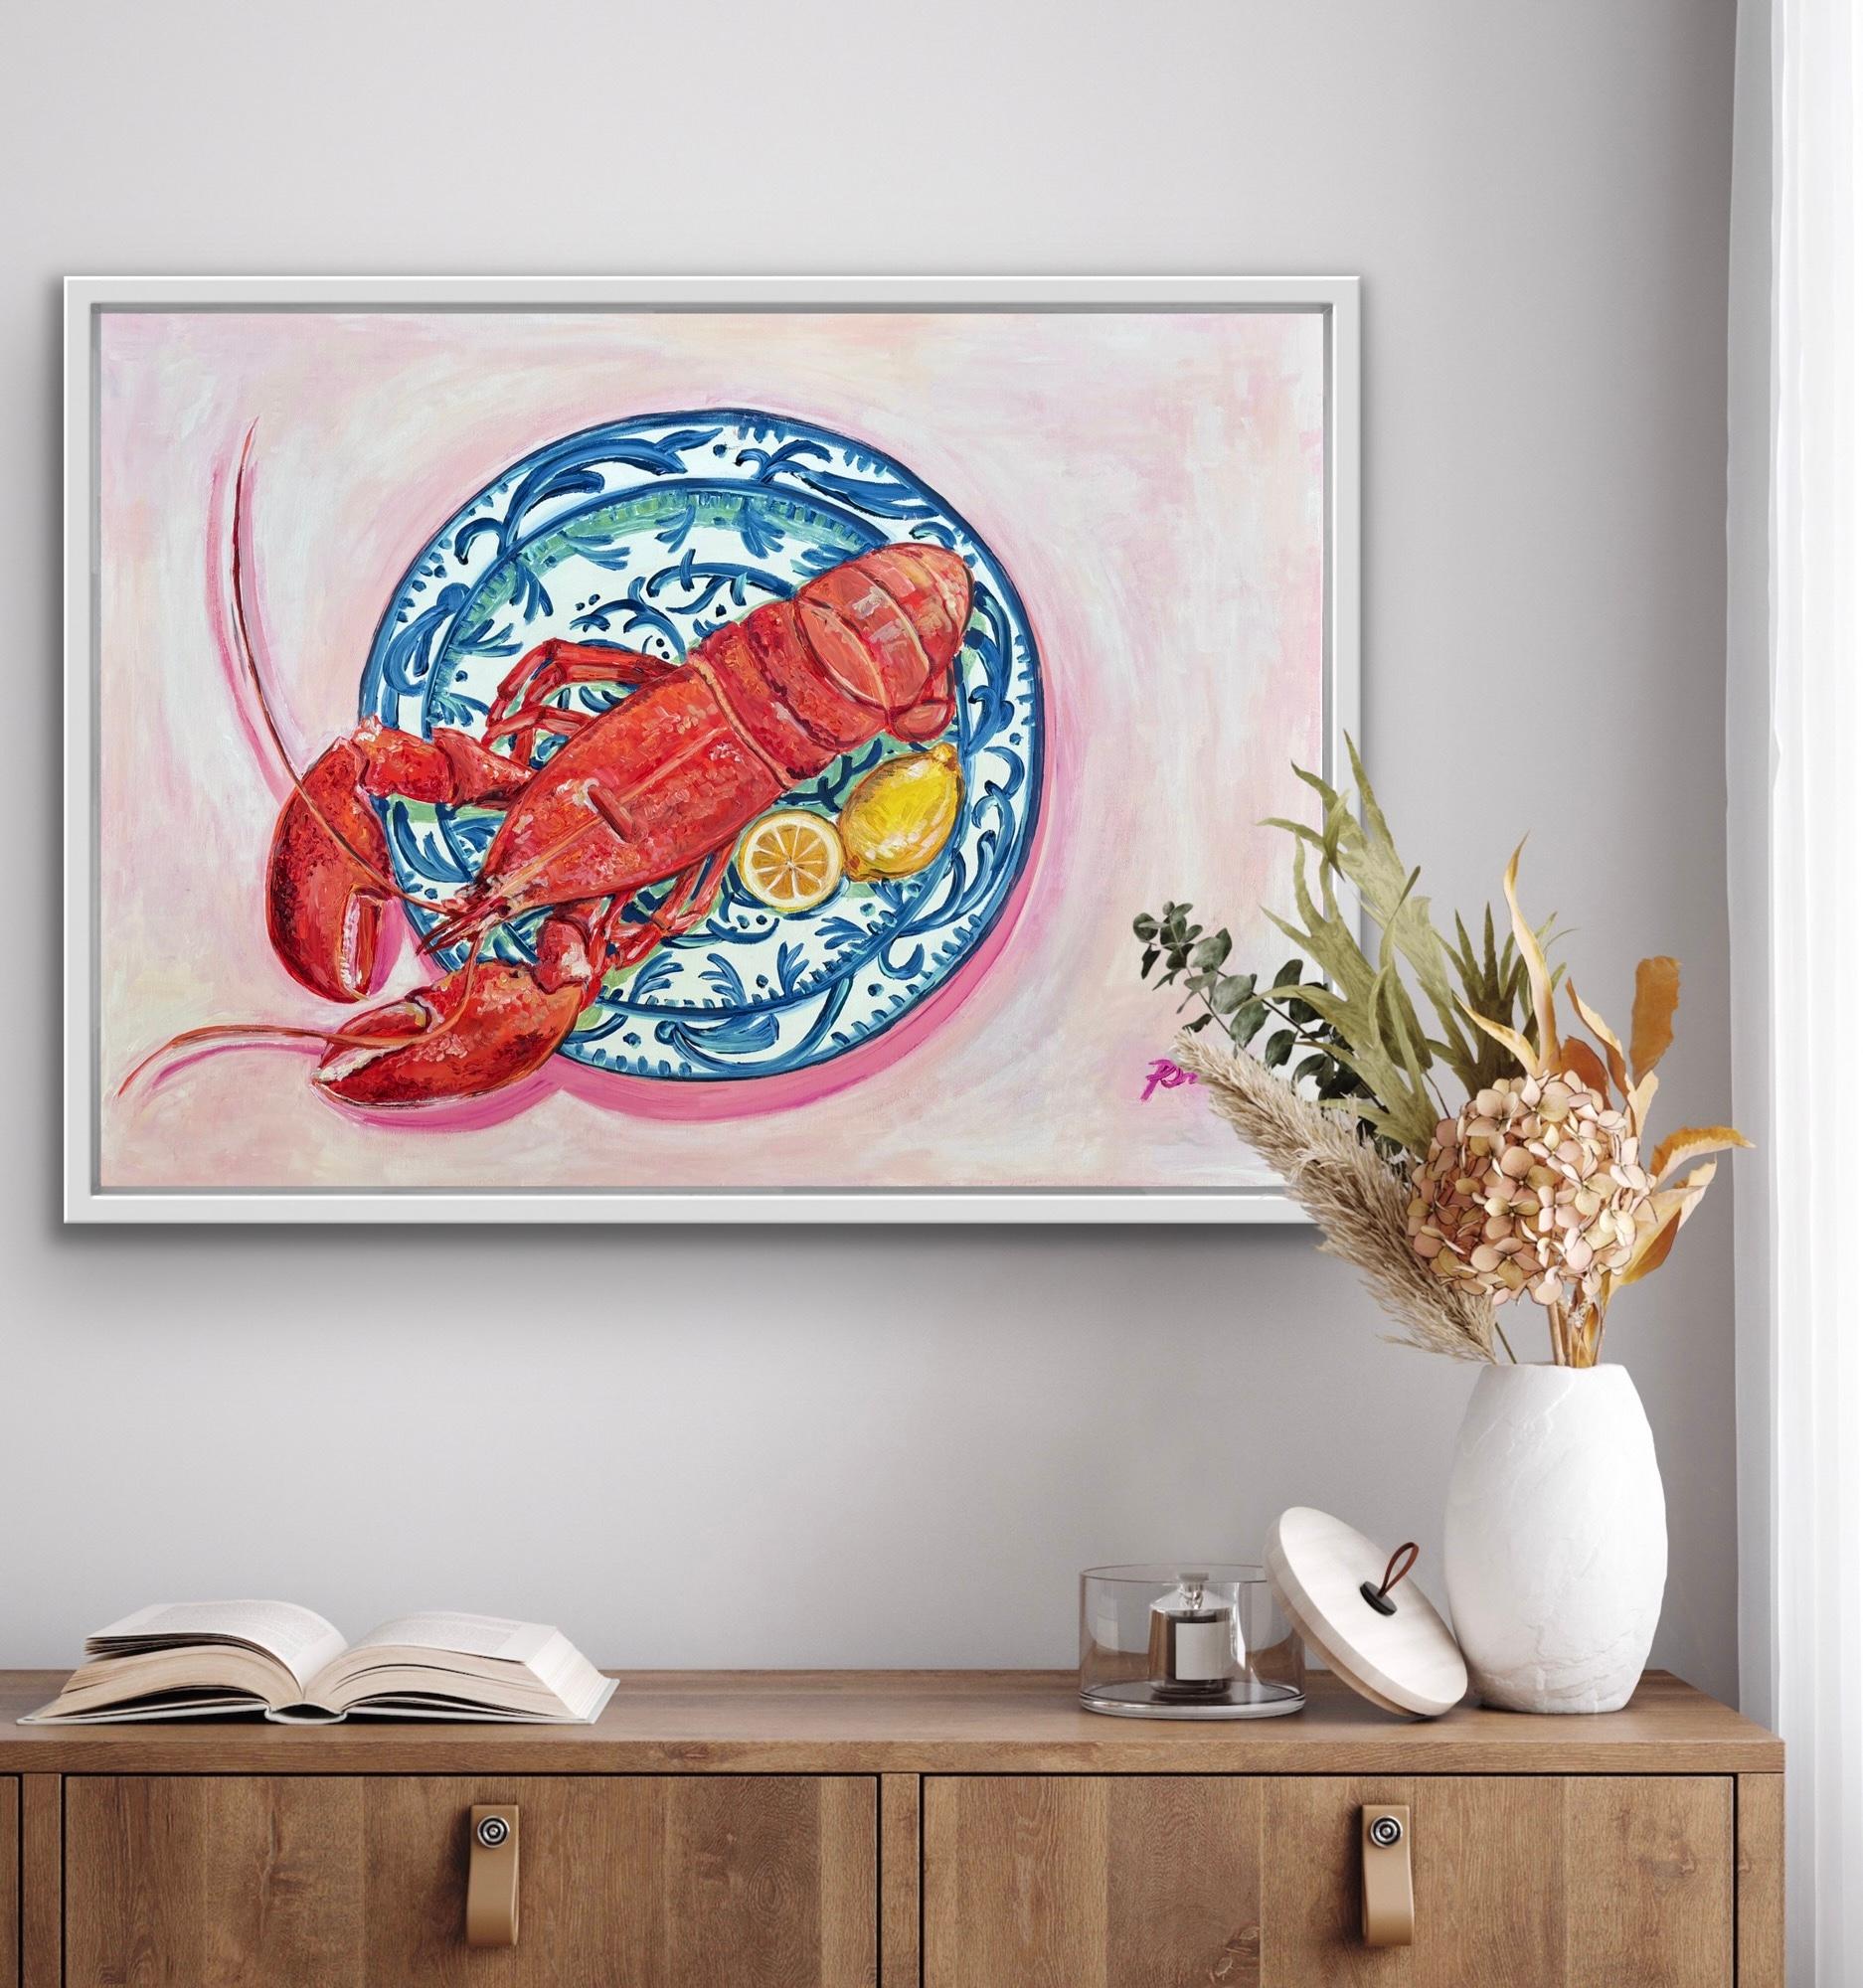 Large Lobster on Blue & White Plate, Original painting, Food art, Seafood - Contemporary Painting by Pippa Smith